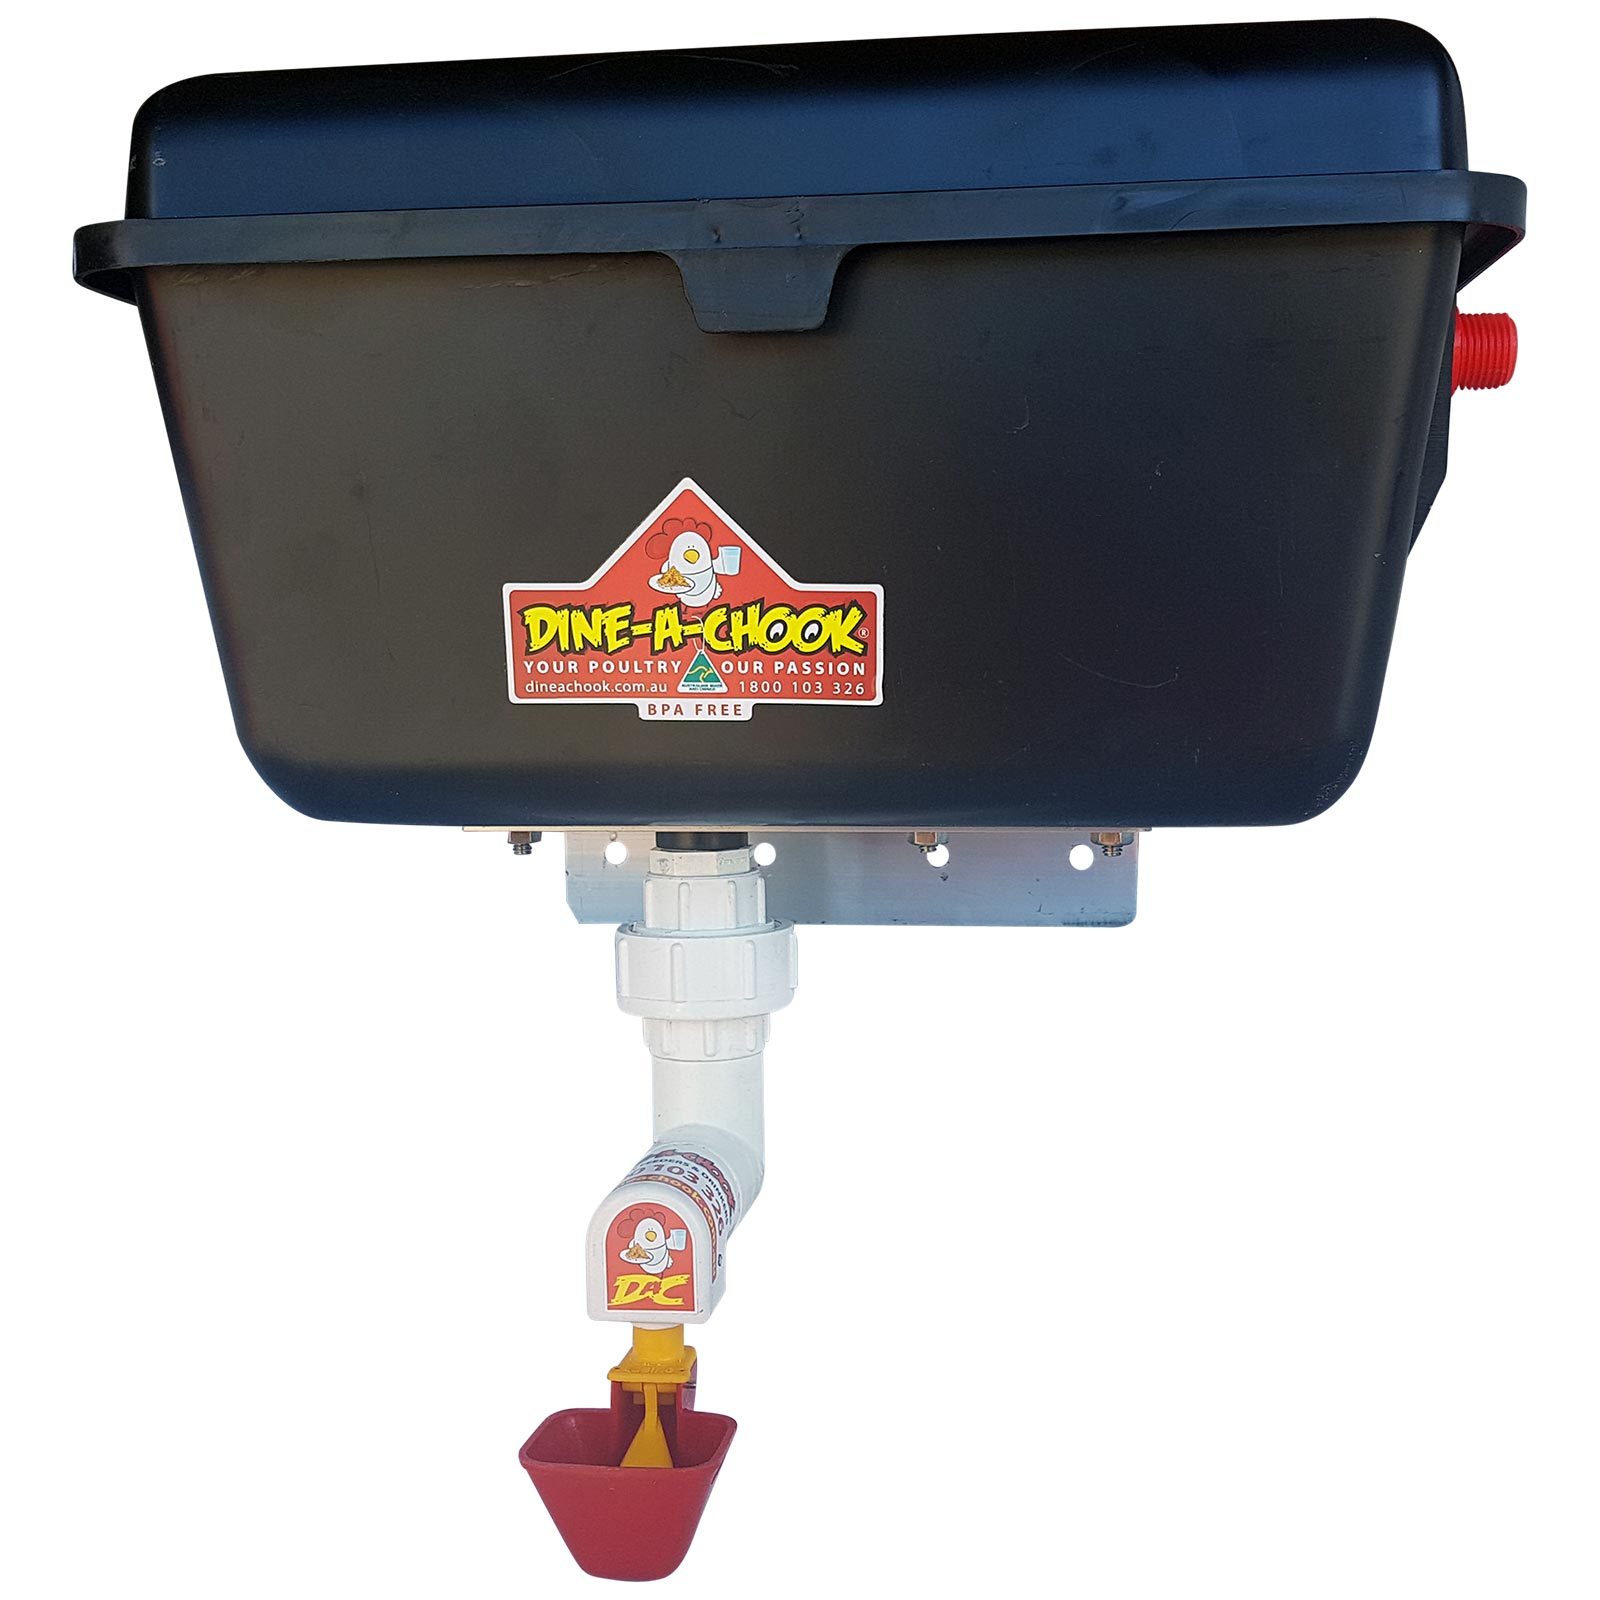 Automatic chicken waterers connected to mains water